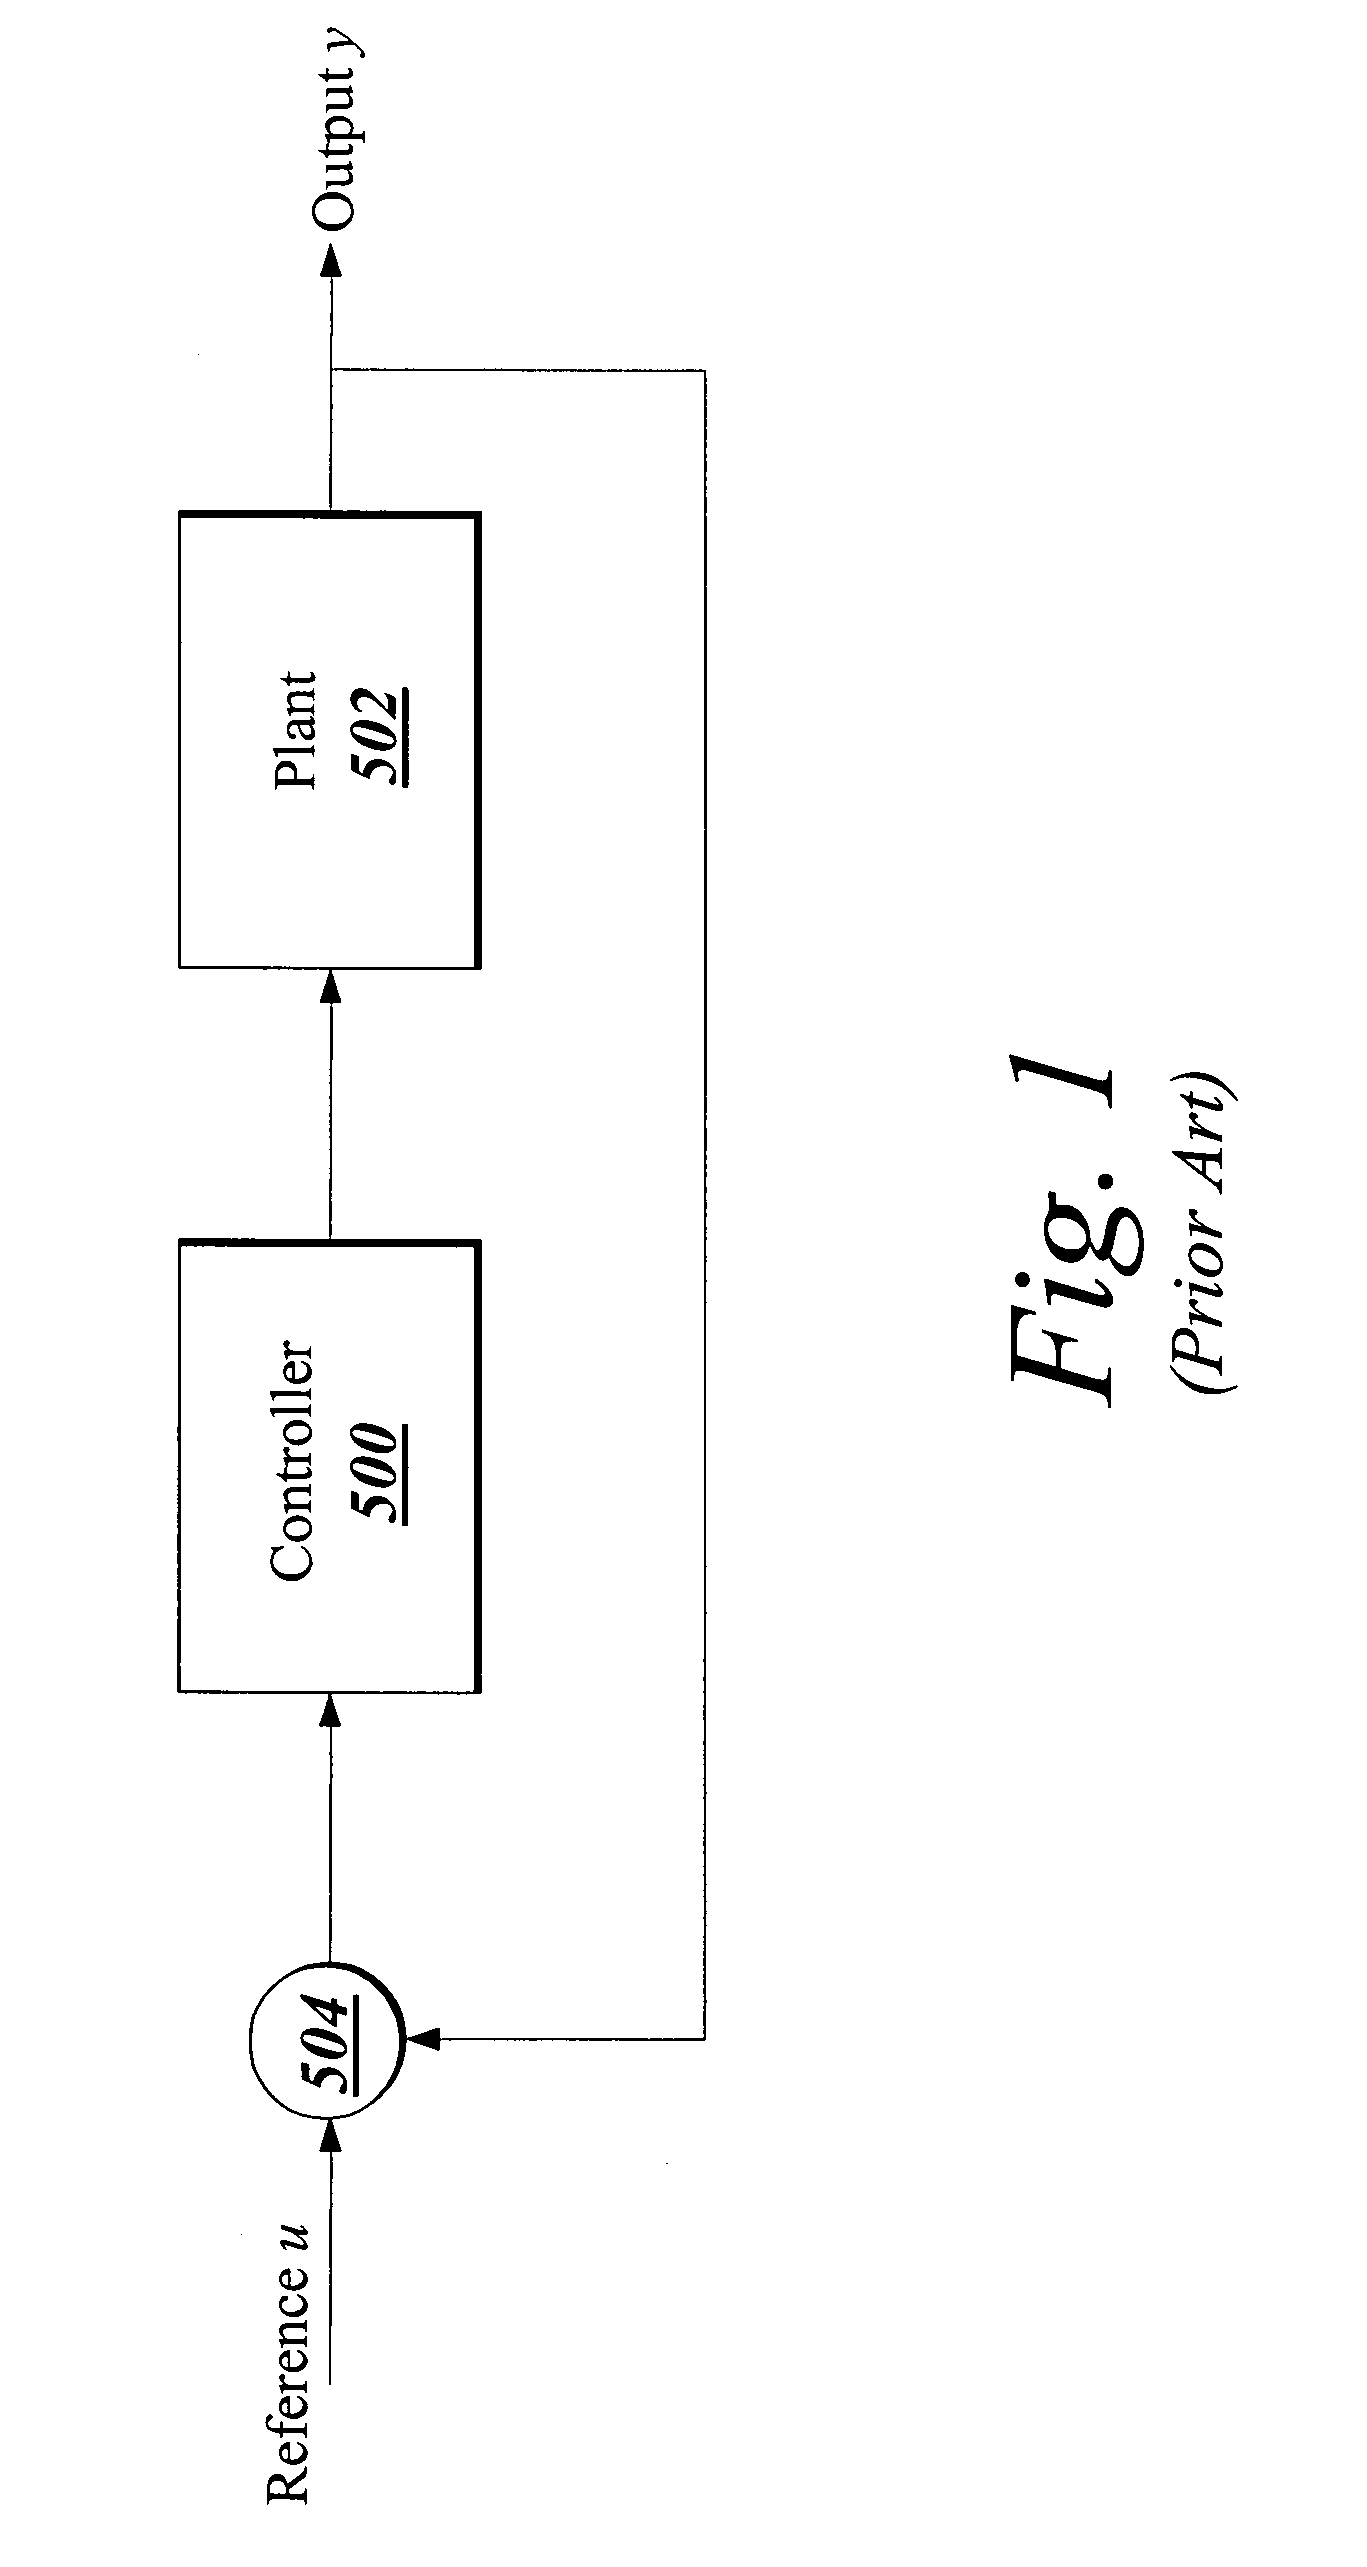 Tool for design of multiple single-input-single-output control loops